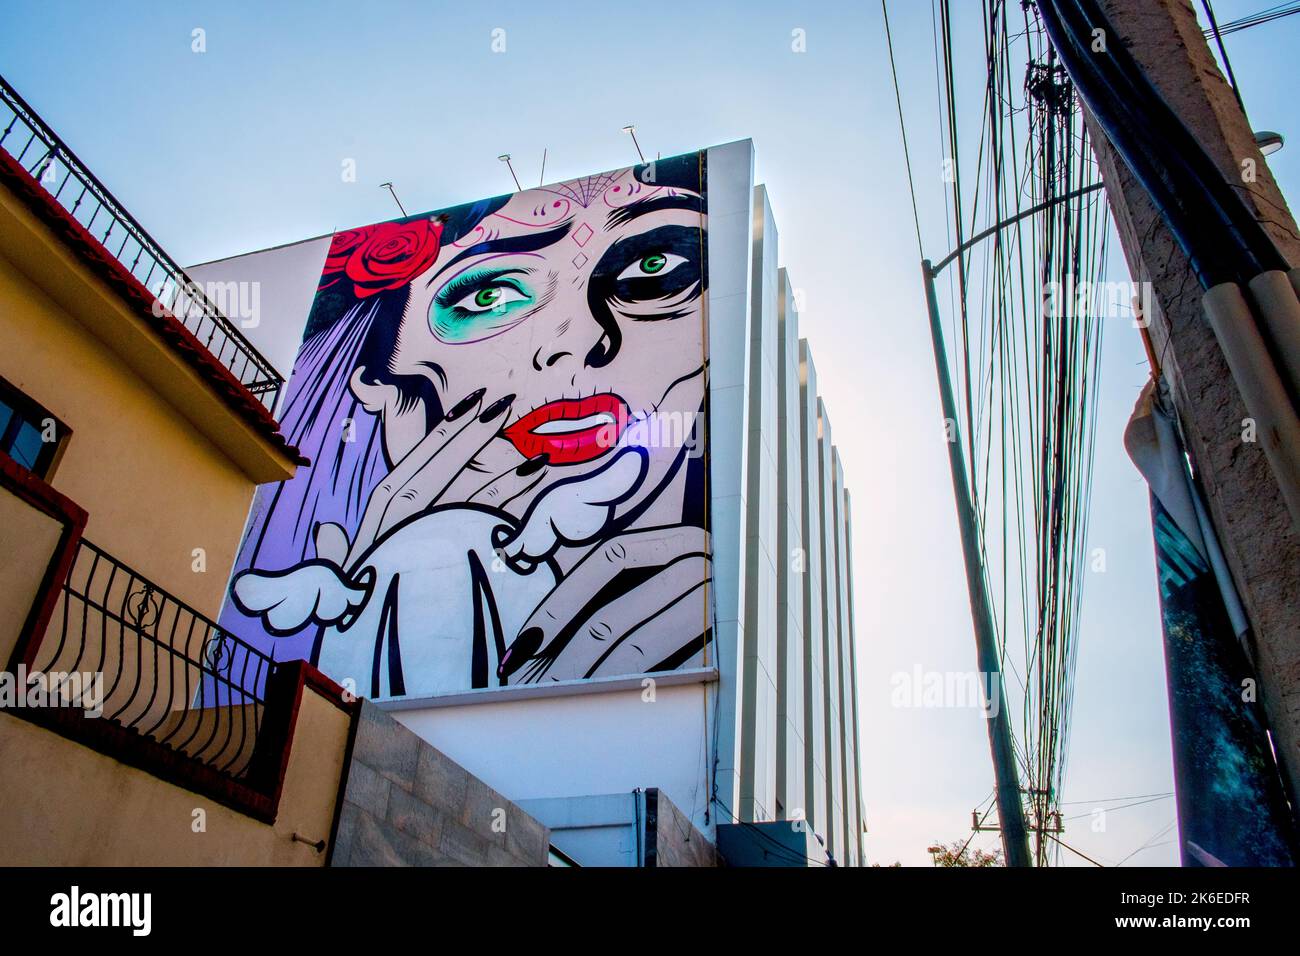 Comic-book style mural on a tall building in the Roma neighborhood of Mexico City Stock Photo